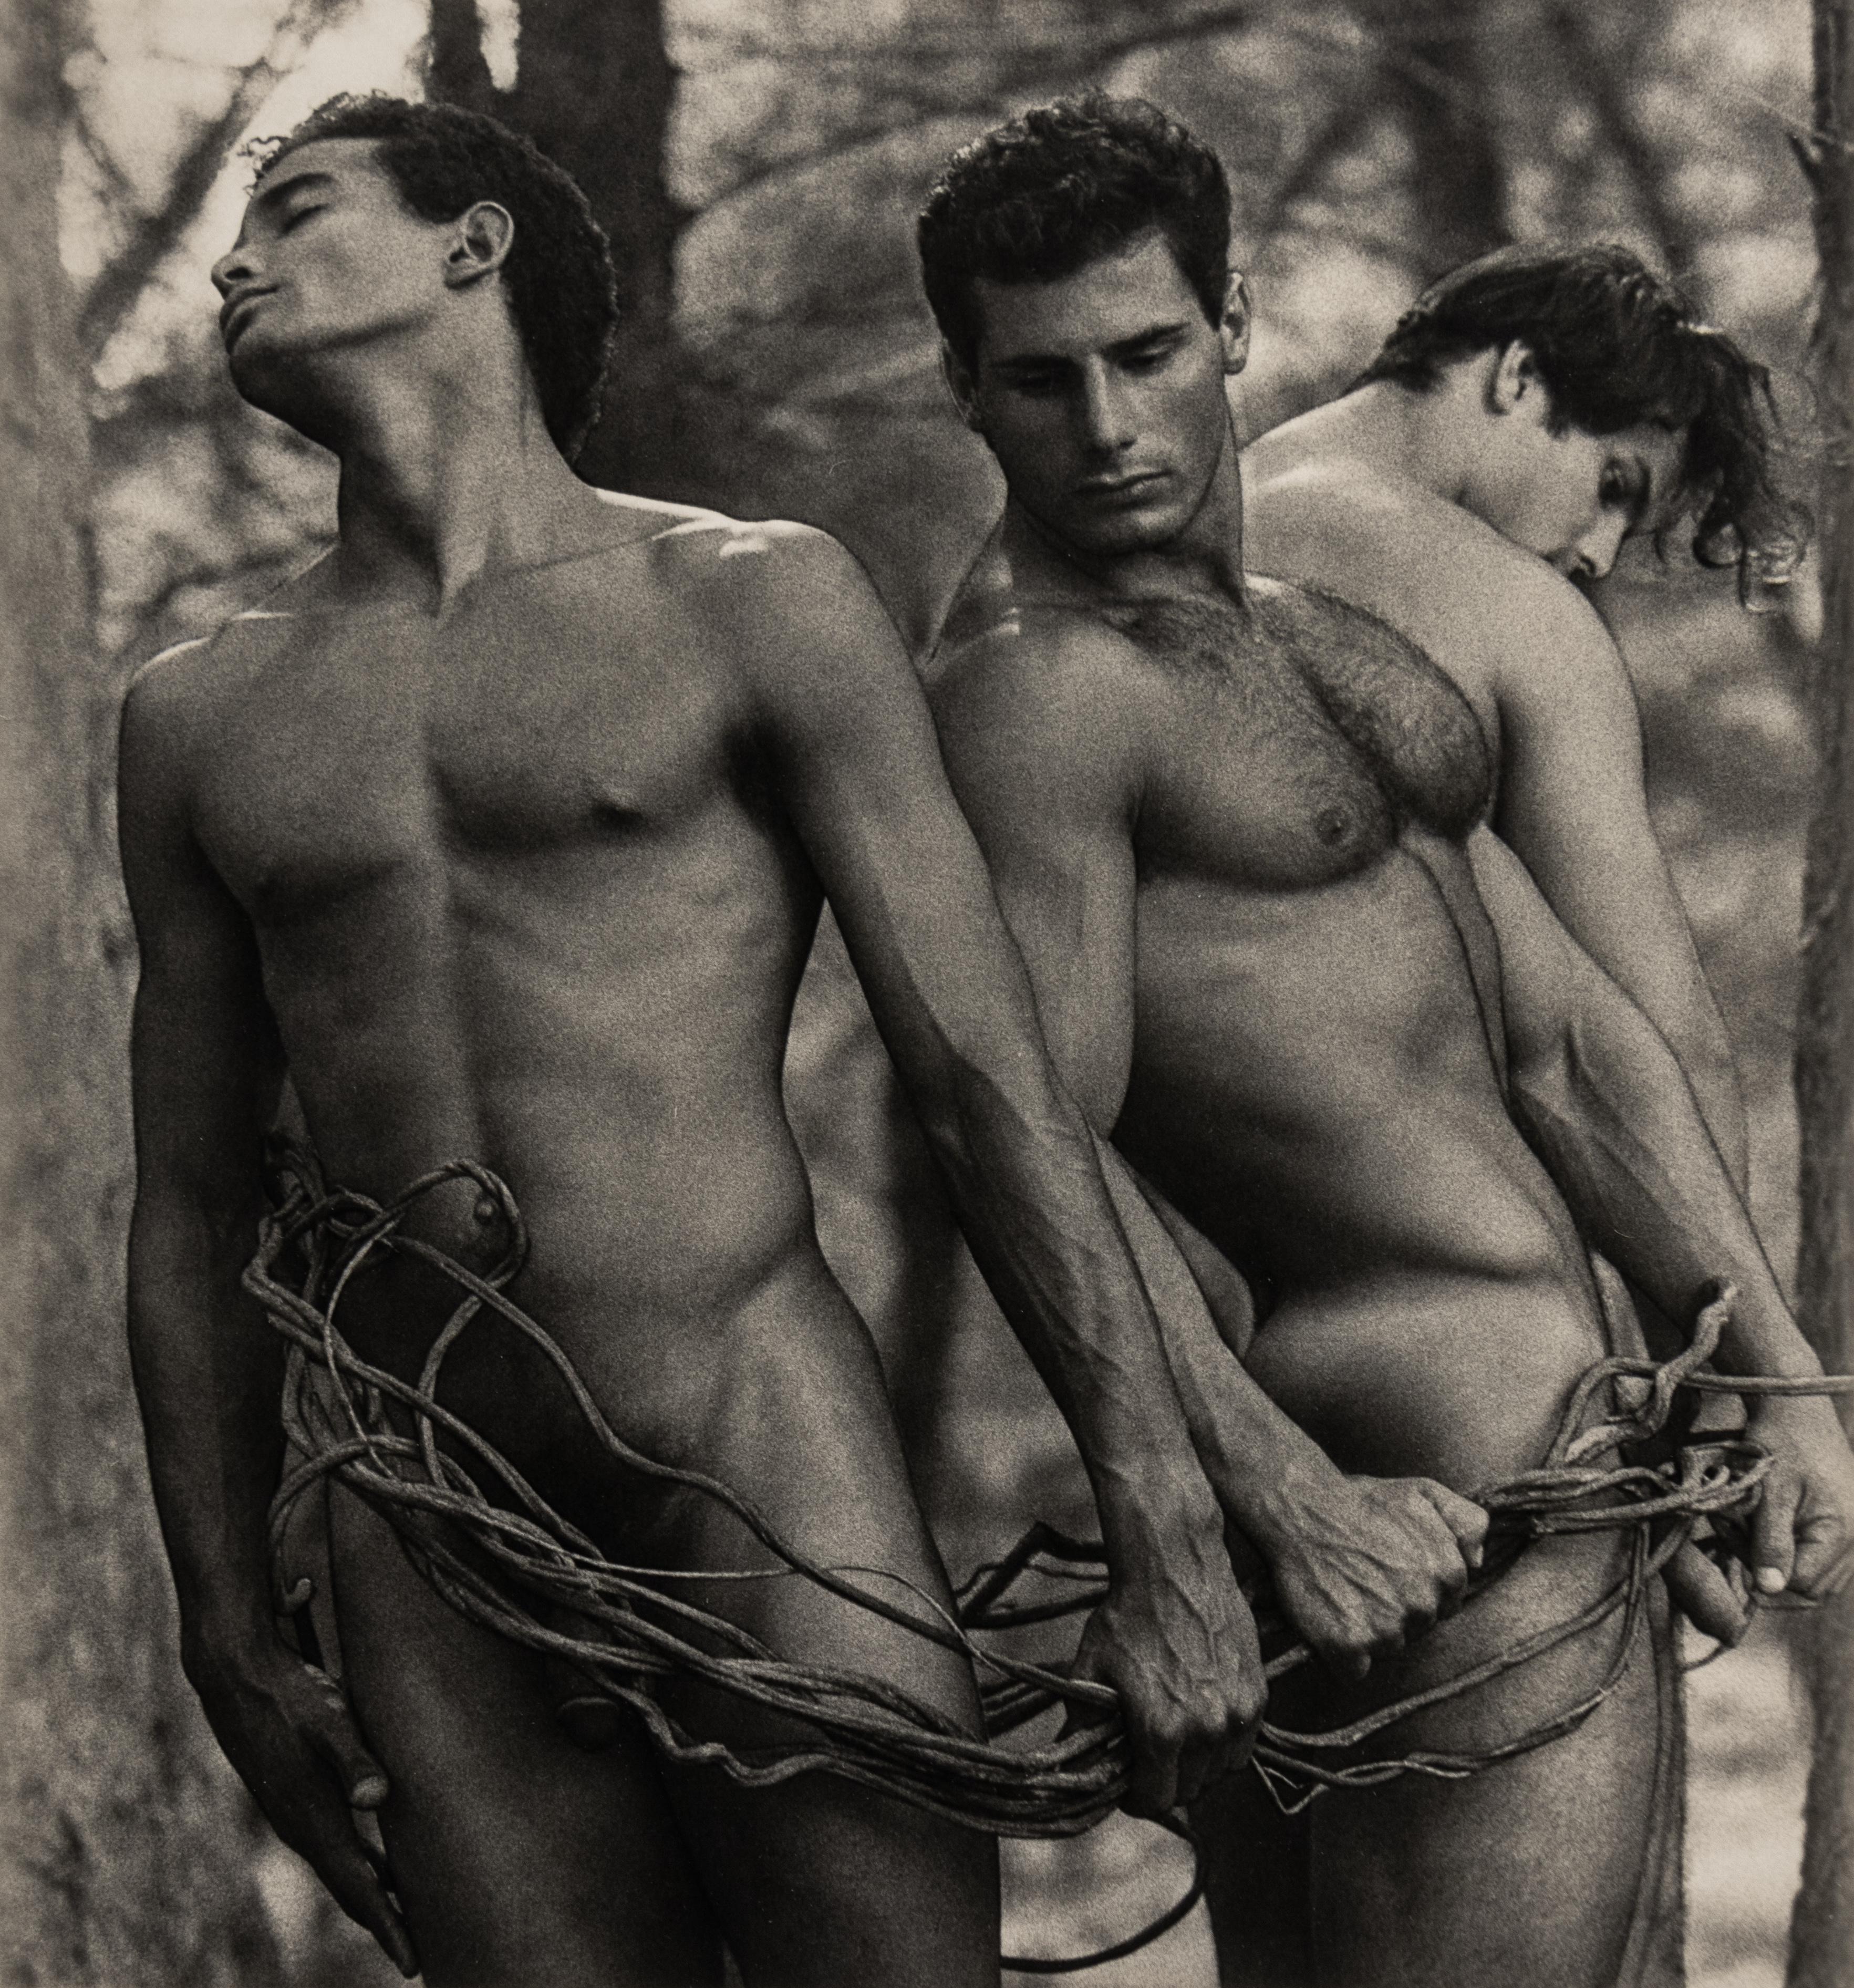 David Vance Nude Photograph - Untitled (Three Nude Men with Vines)